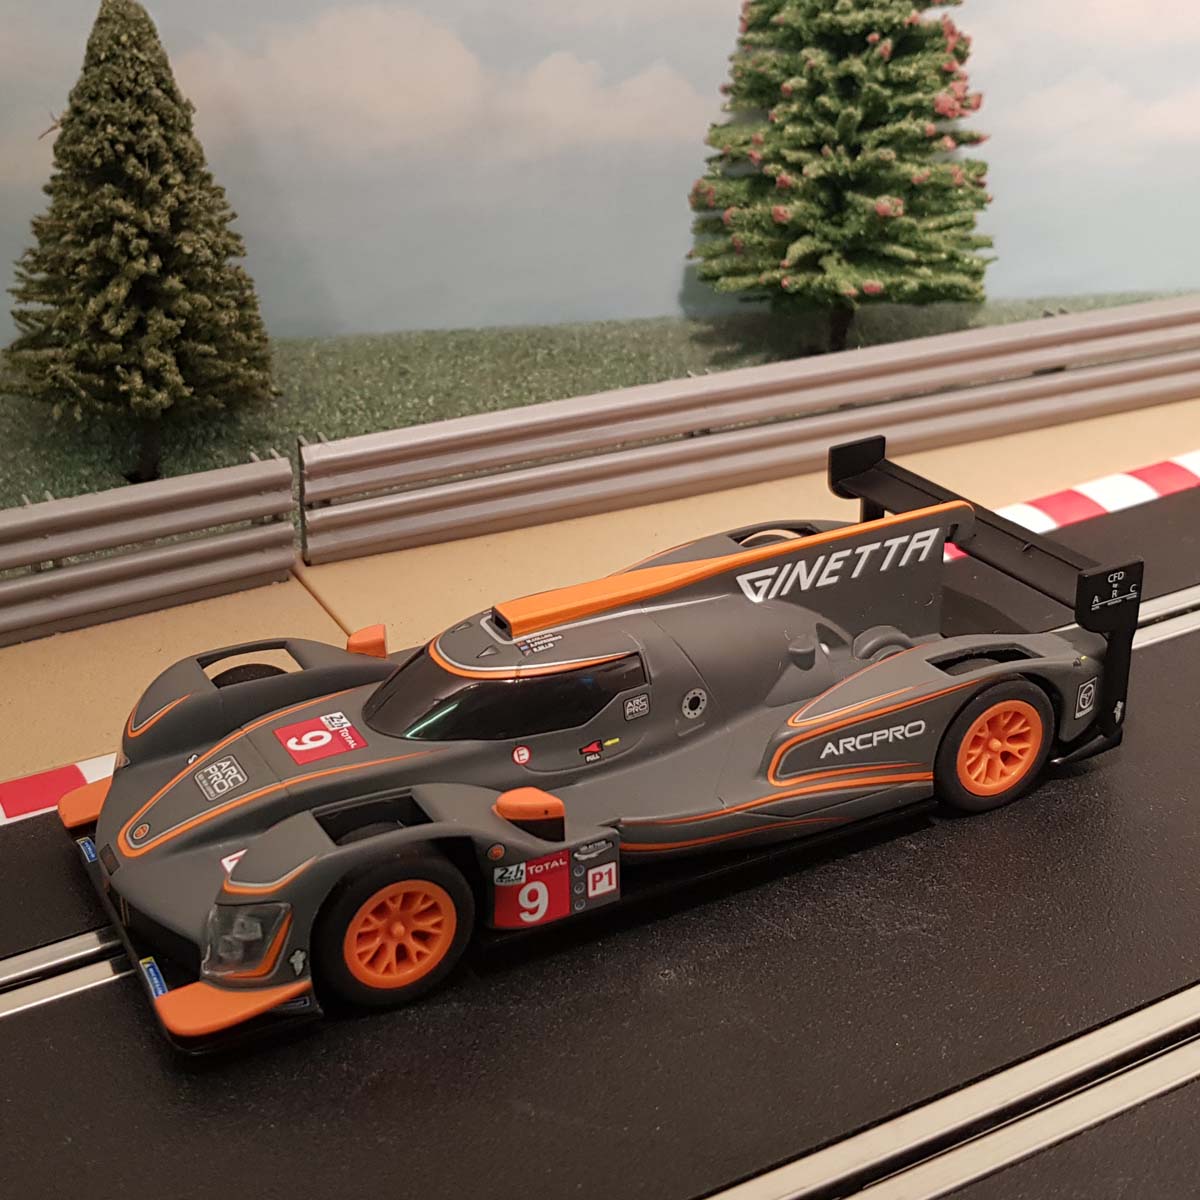 Coche Scalextric 1:32 - Gris y Naranja Ginetta G60 LMP1 Le Mans #9 *LUCES* #Q